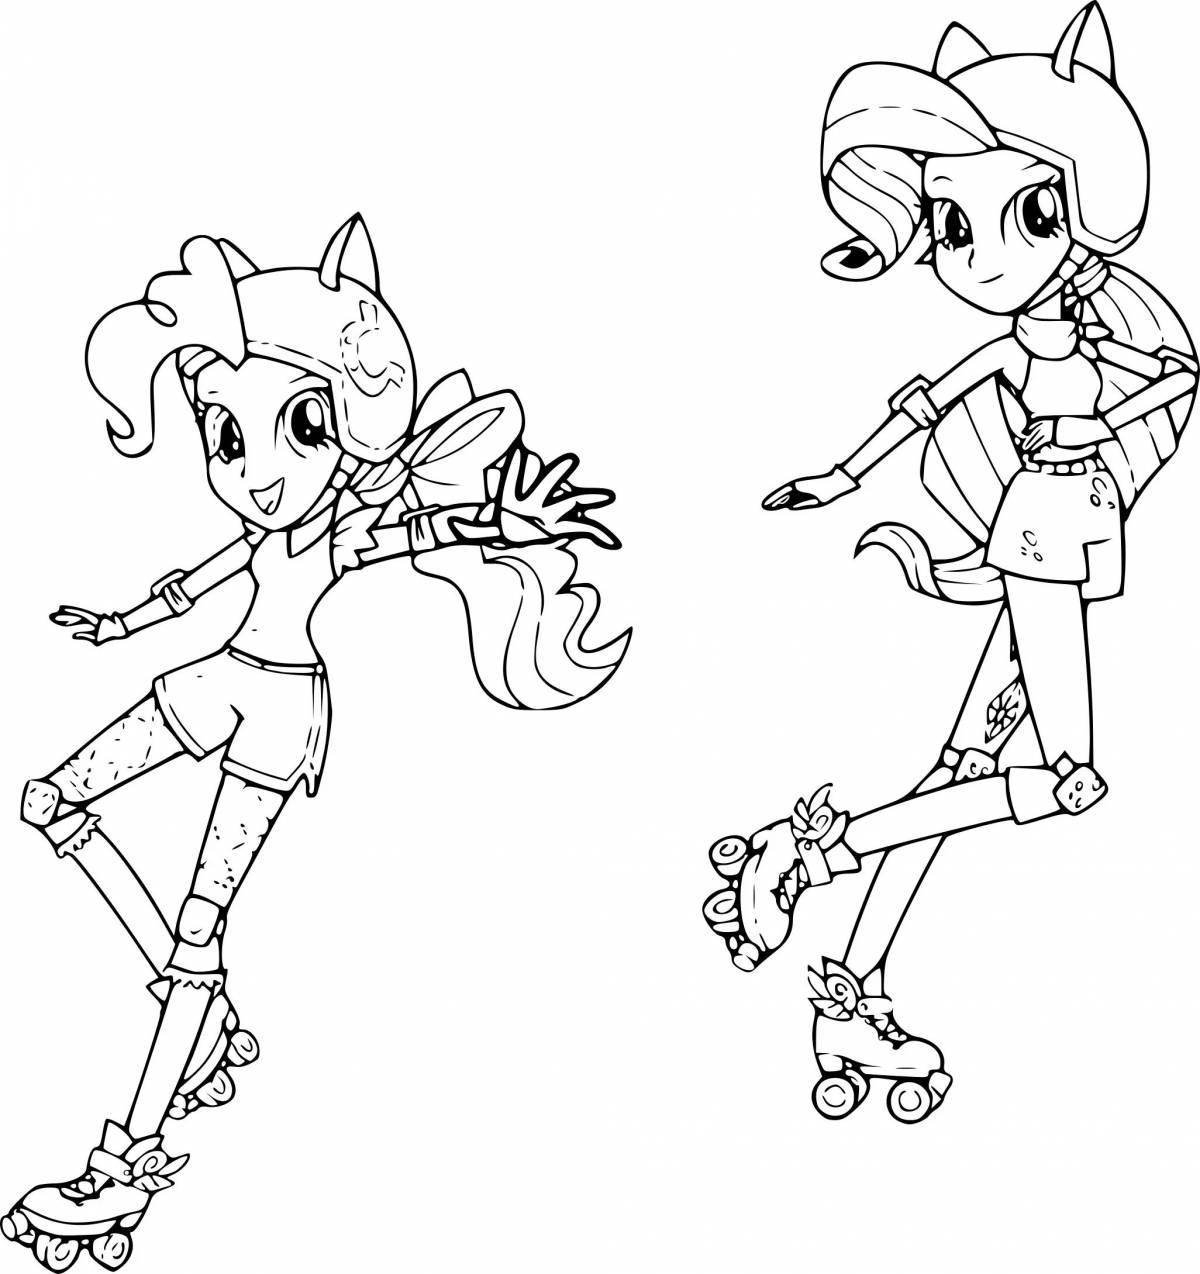 Fabulous little pony girls coloring pages